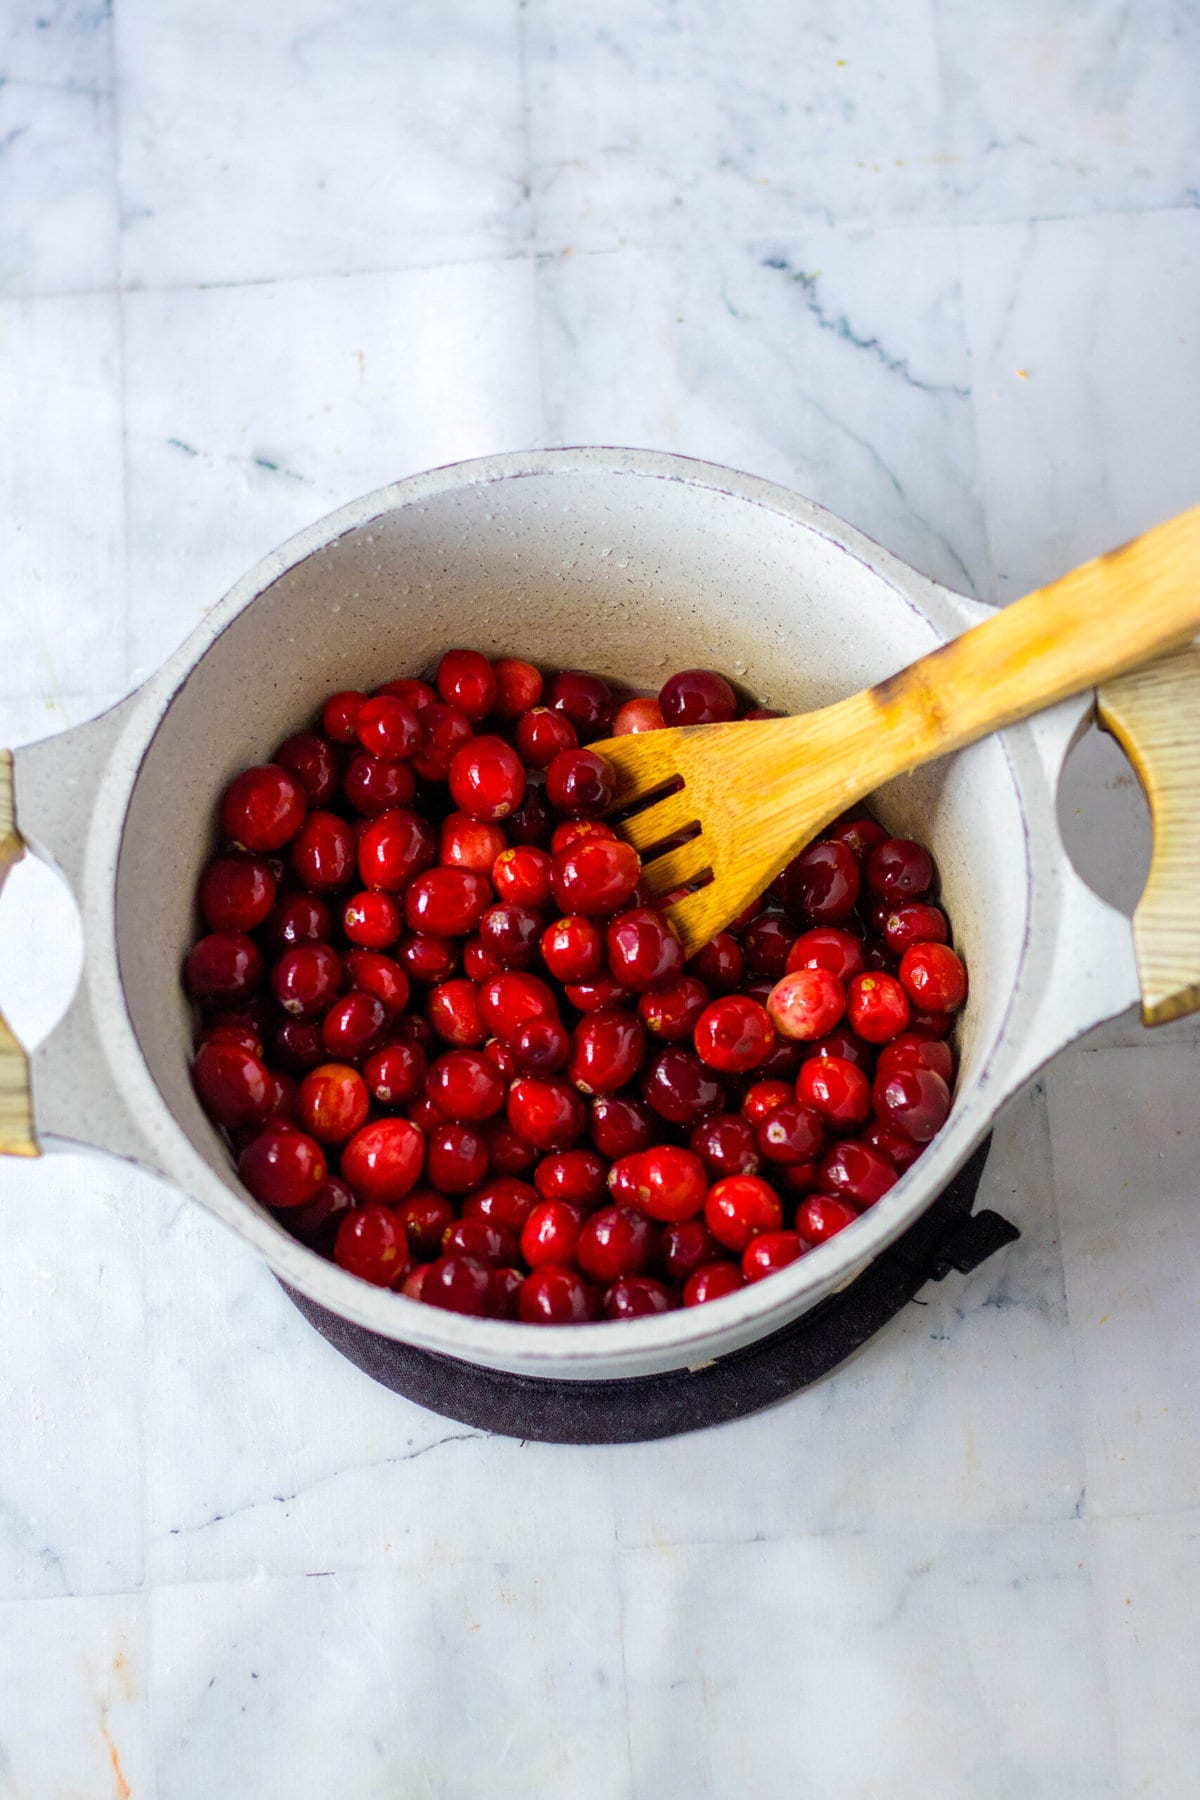 Cooking the cranberries.